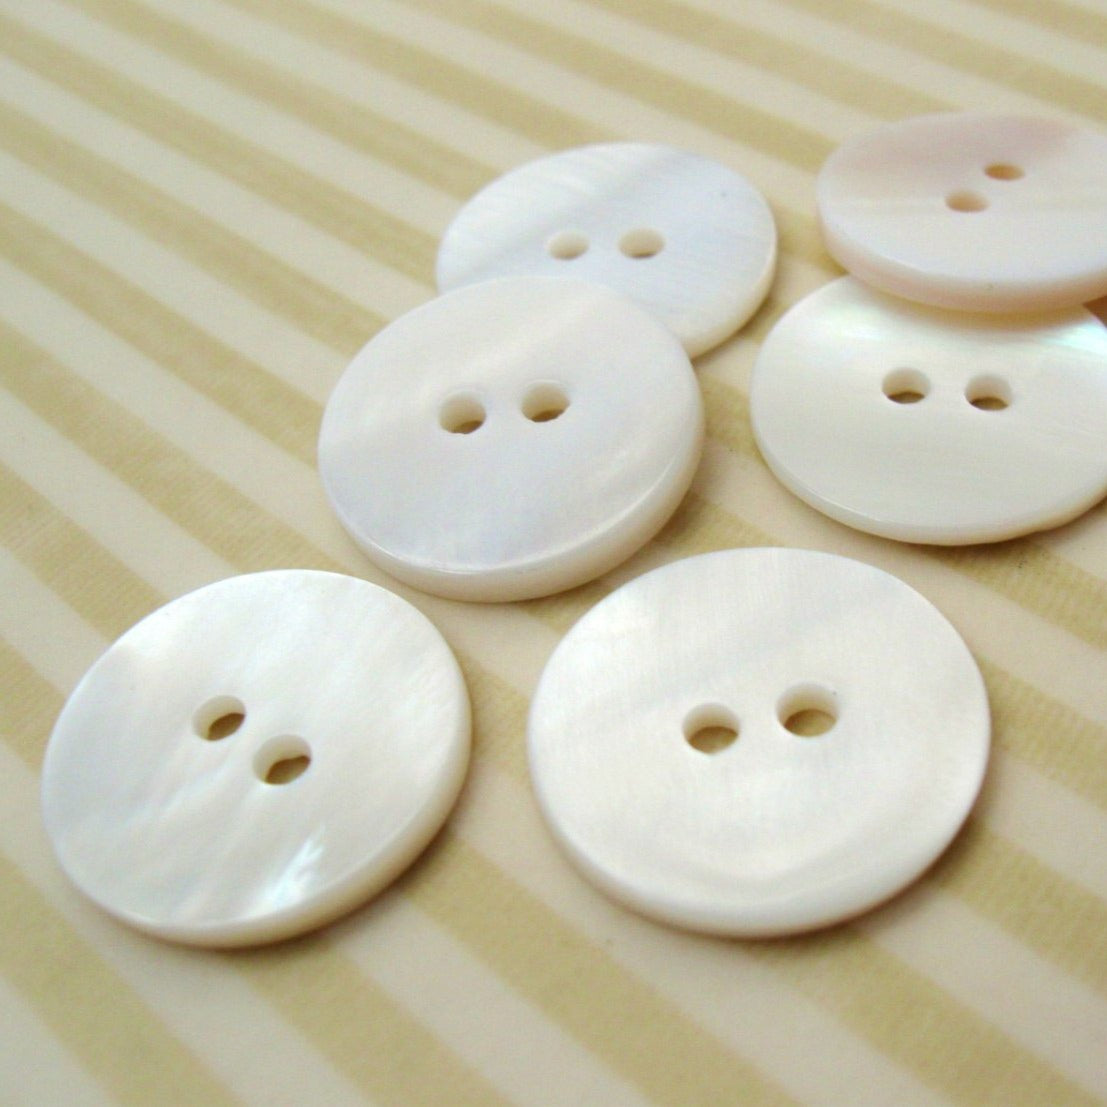 MOP buttons - Mother of Pearl Shell Buttons 18mm - set of 6 eco friendly natural buttons